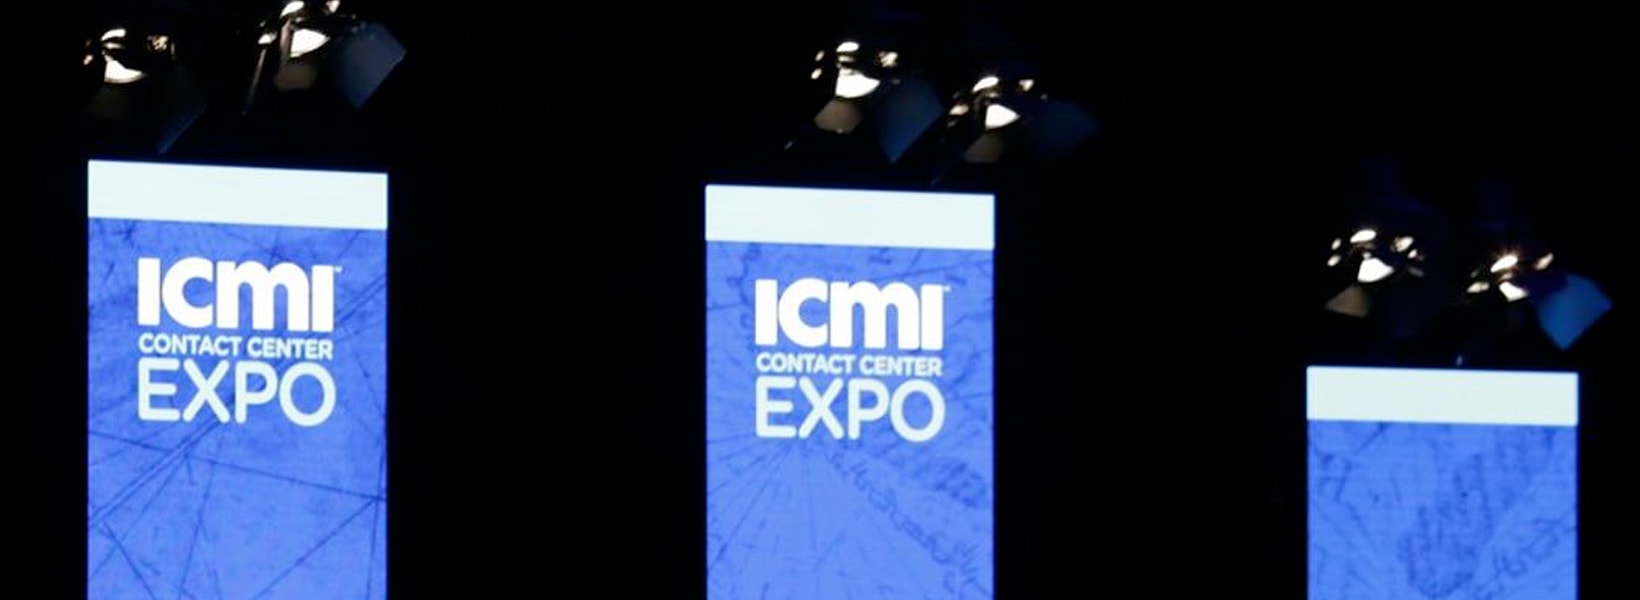 ICMI Expo 2019 Conference Roundup